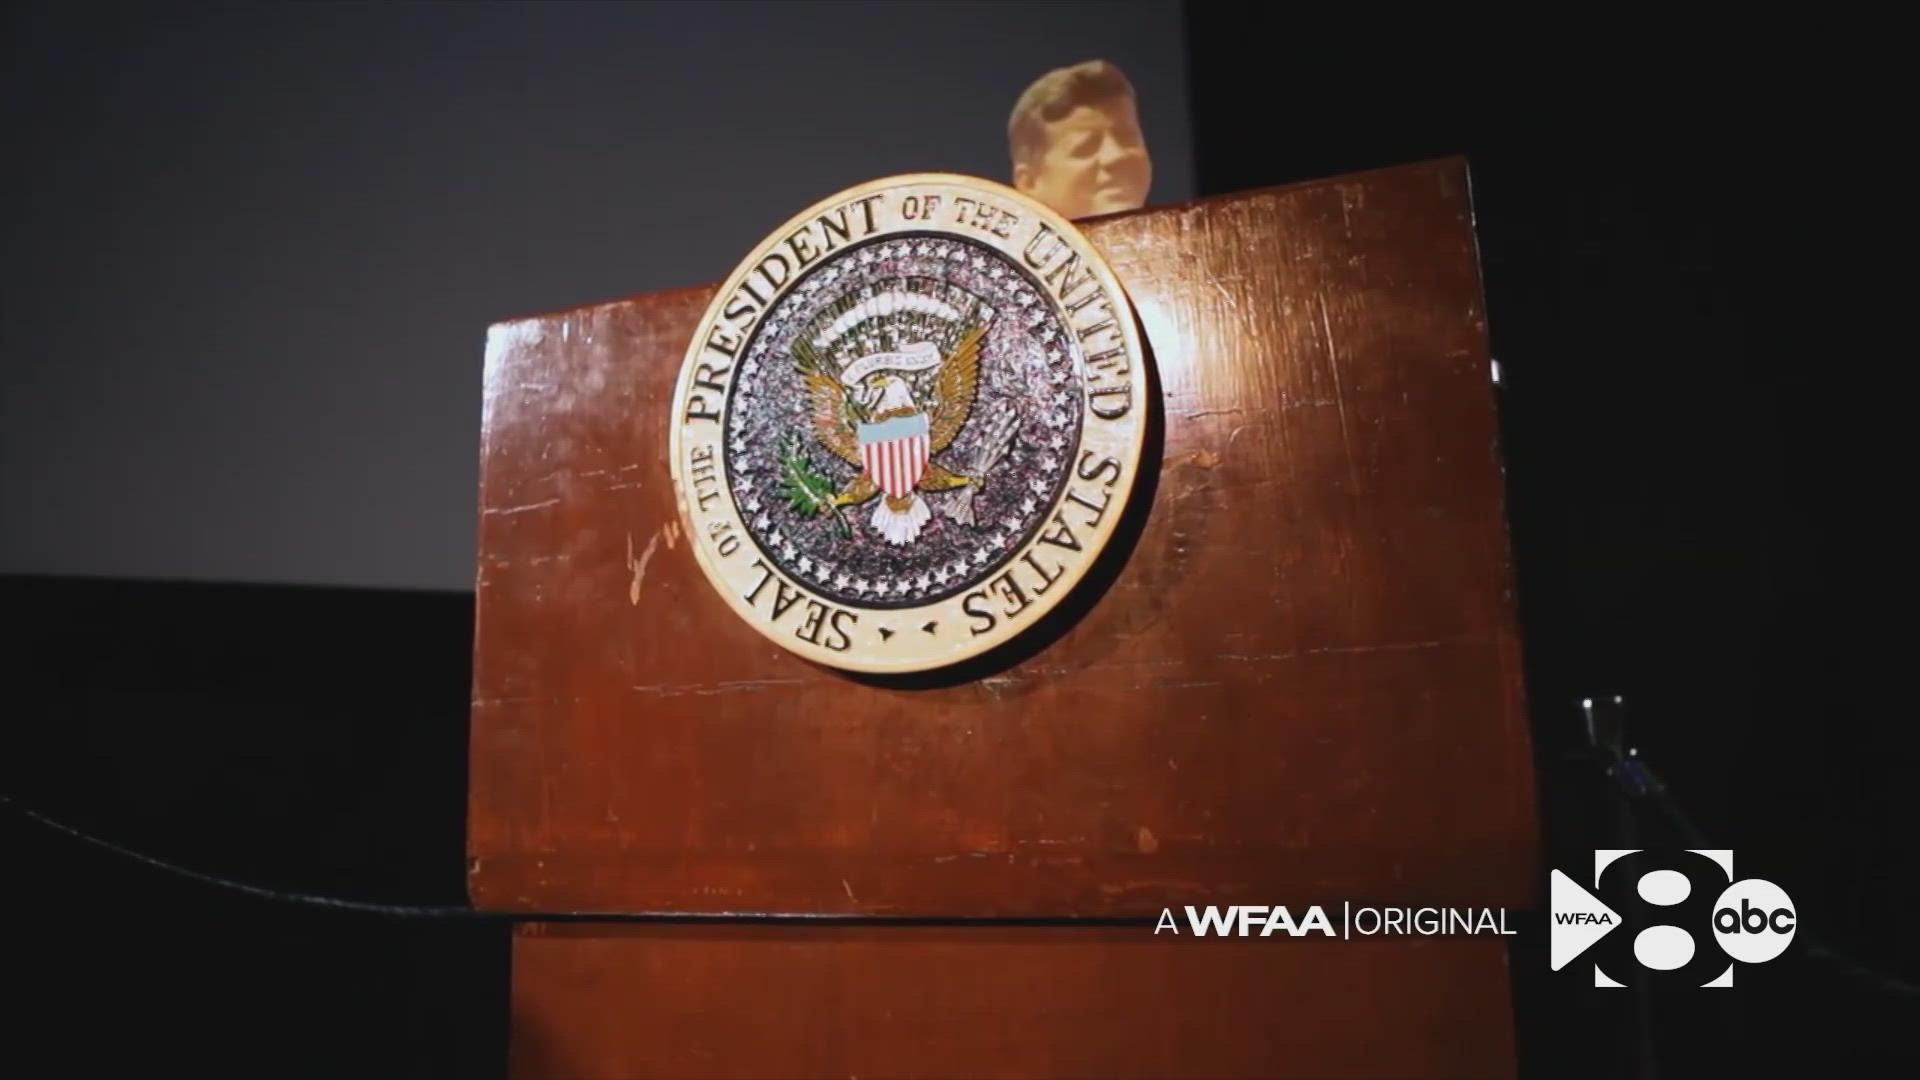 A lectern, on display for more than 30 years at Space Center Houston, is not the actual one President Kennedy used in one of his famous speeches, historian shows.